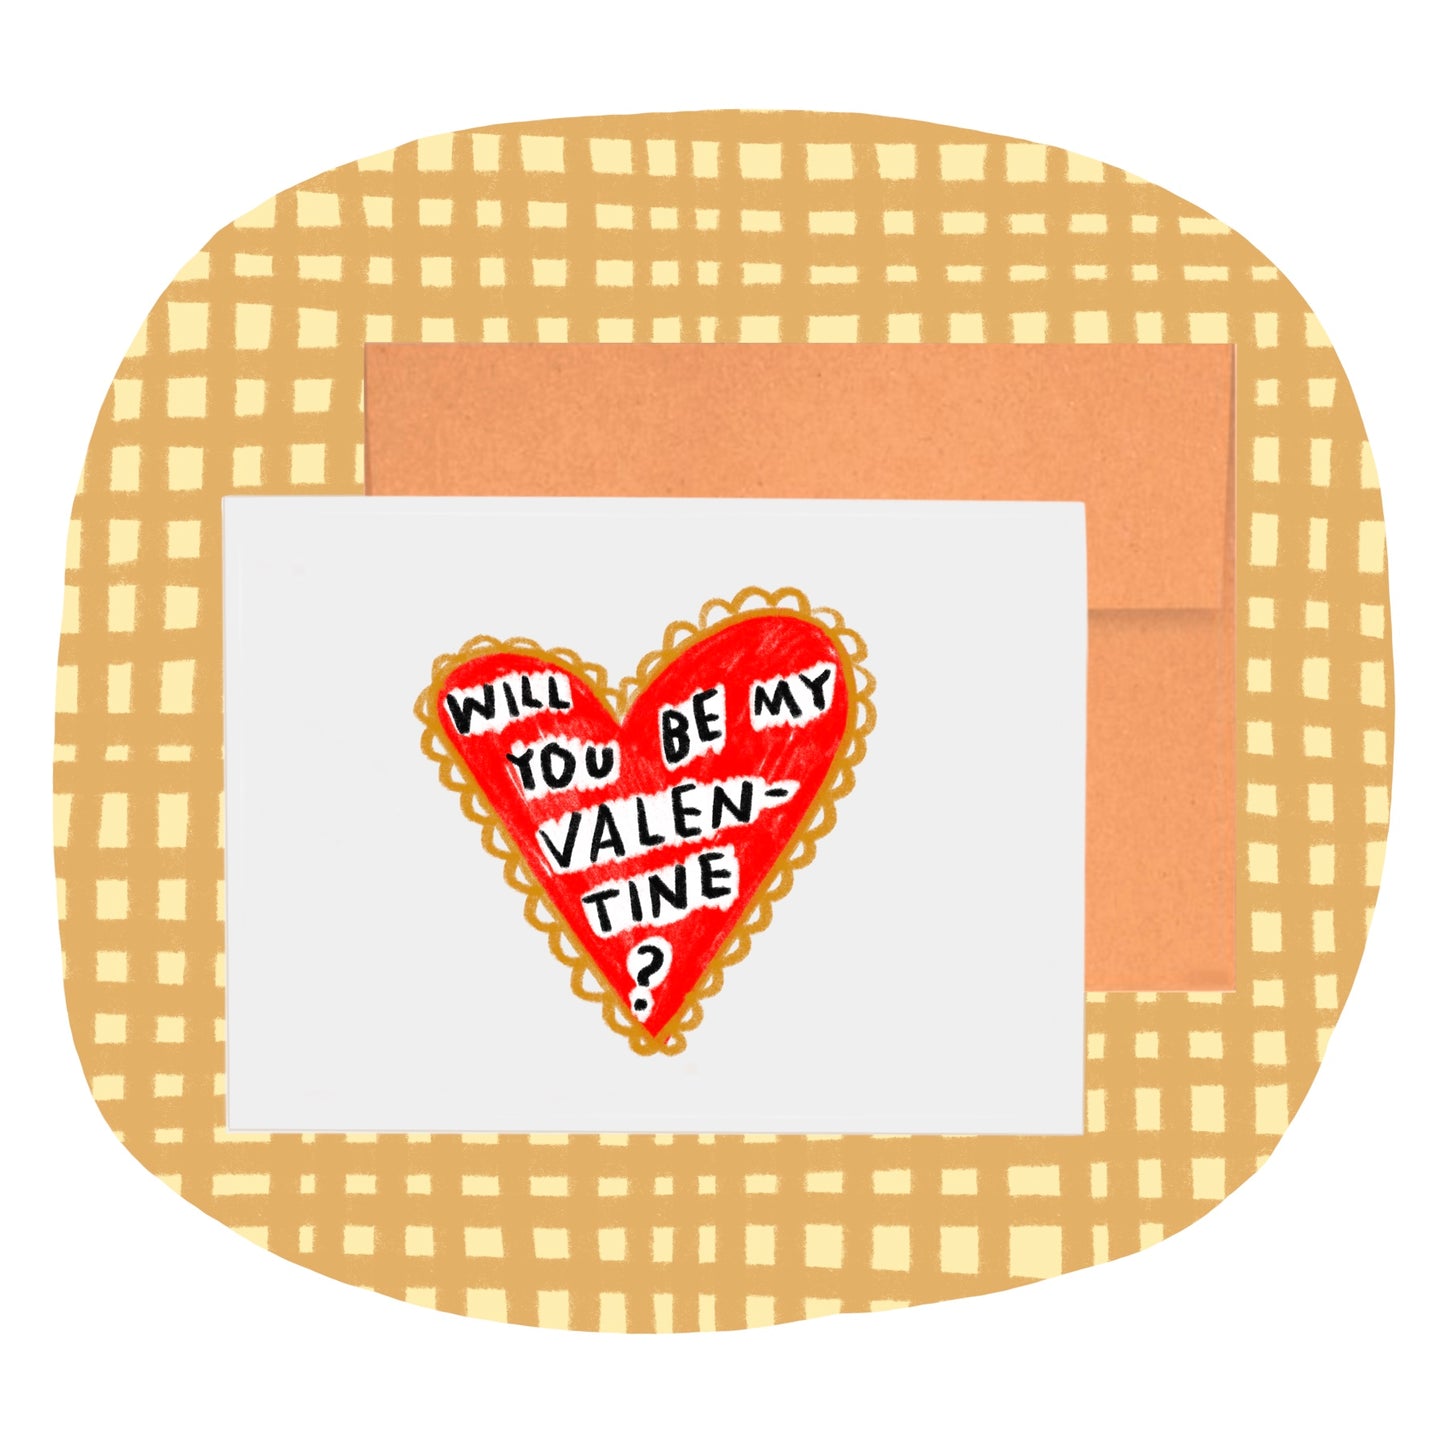 WILL YOU BE MY VALENTINE? Greeting Card